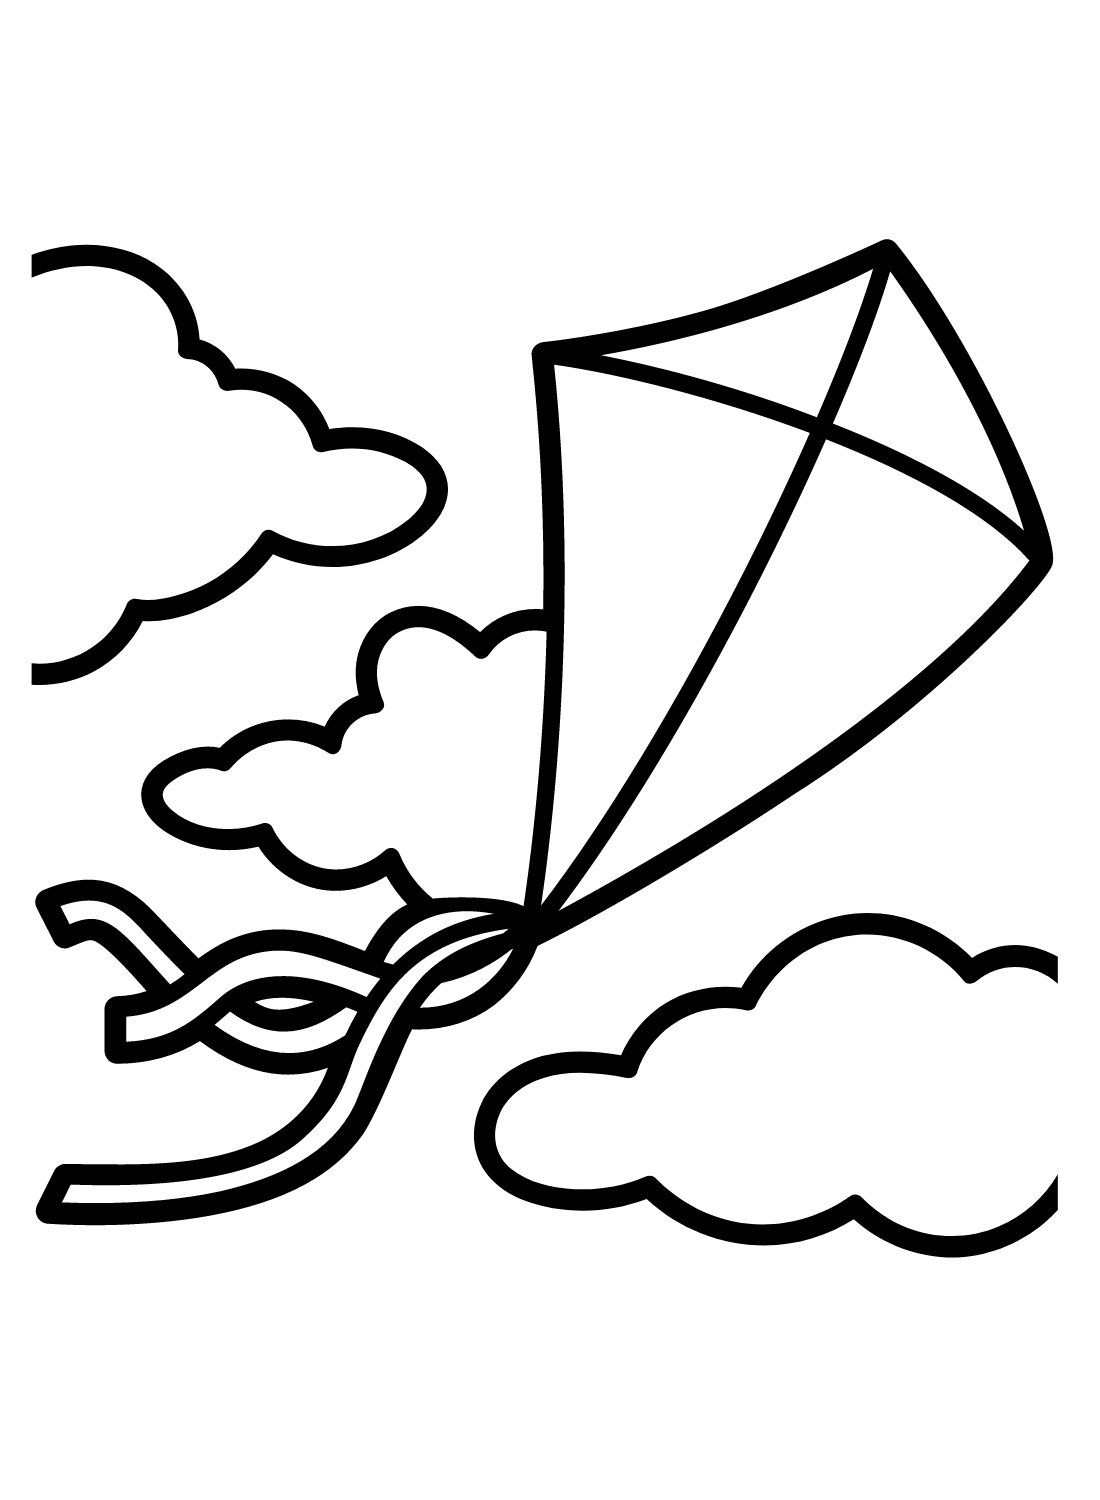 Kite coloring pages printable for free download